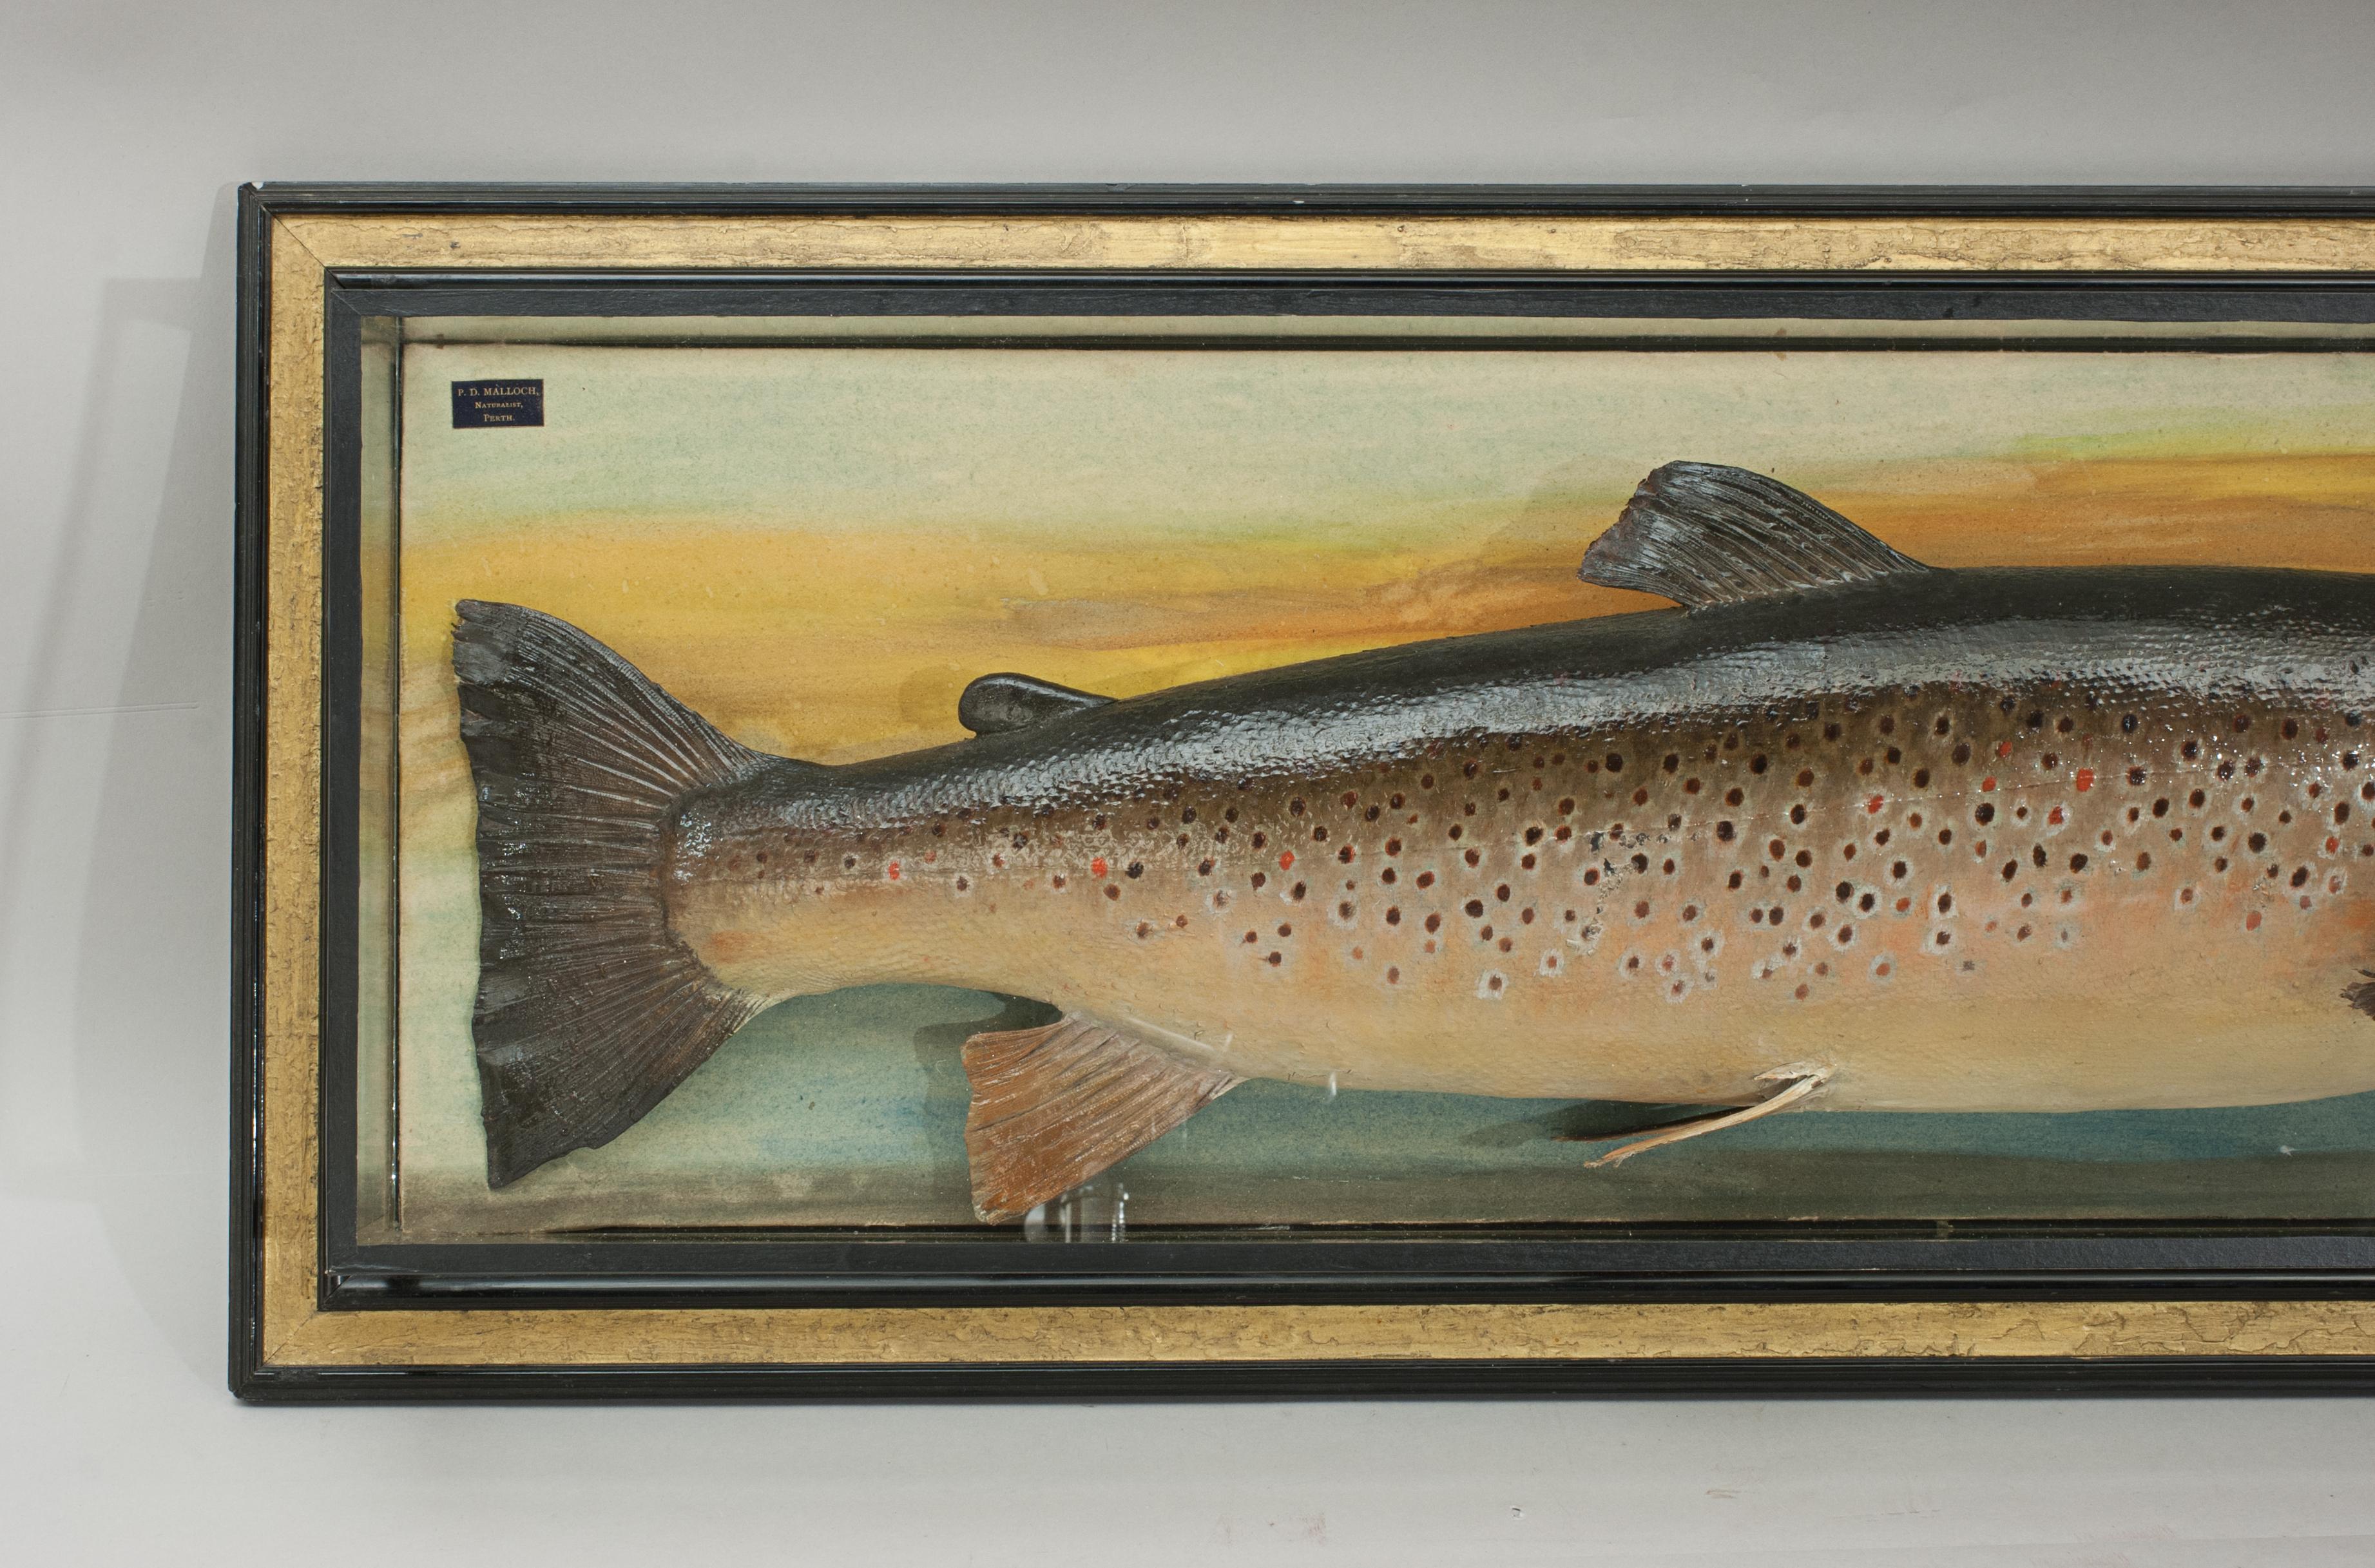 Sporting Art Trophy Fish Model of a Brown Trout by Malloch